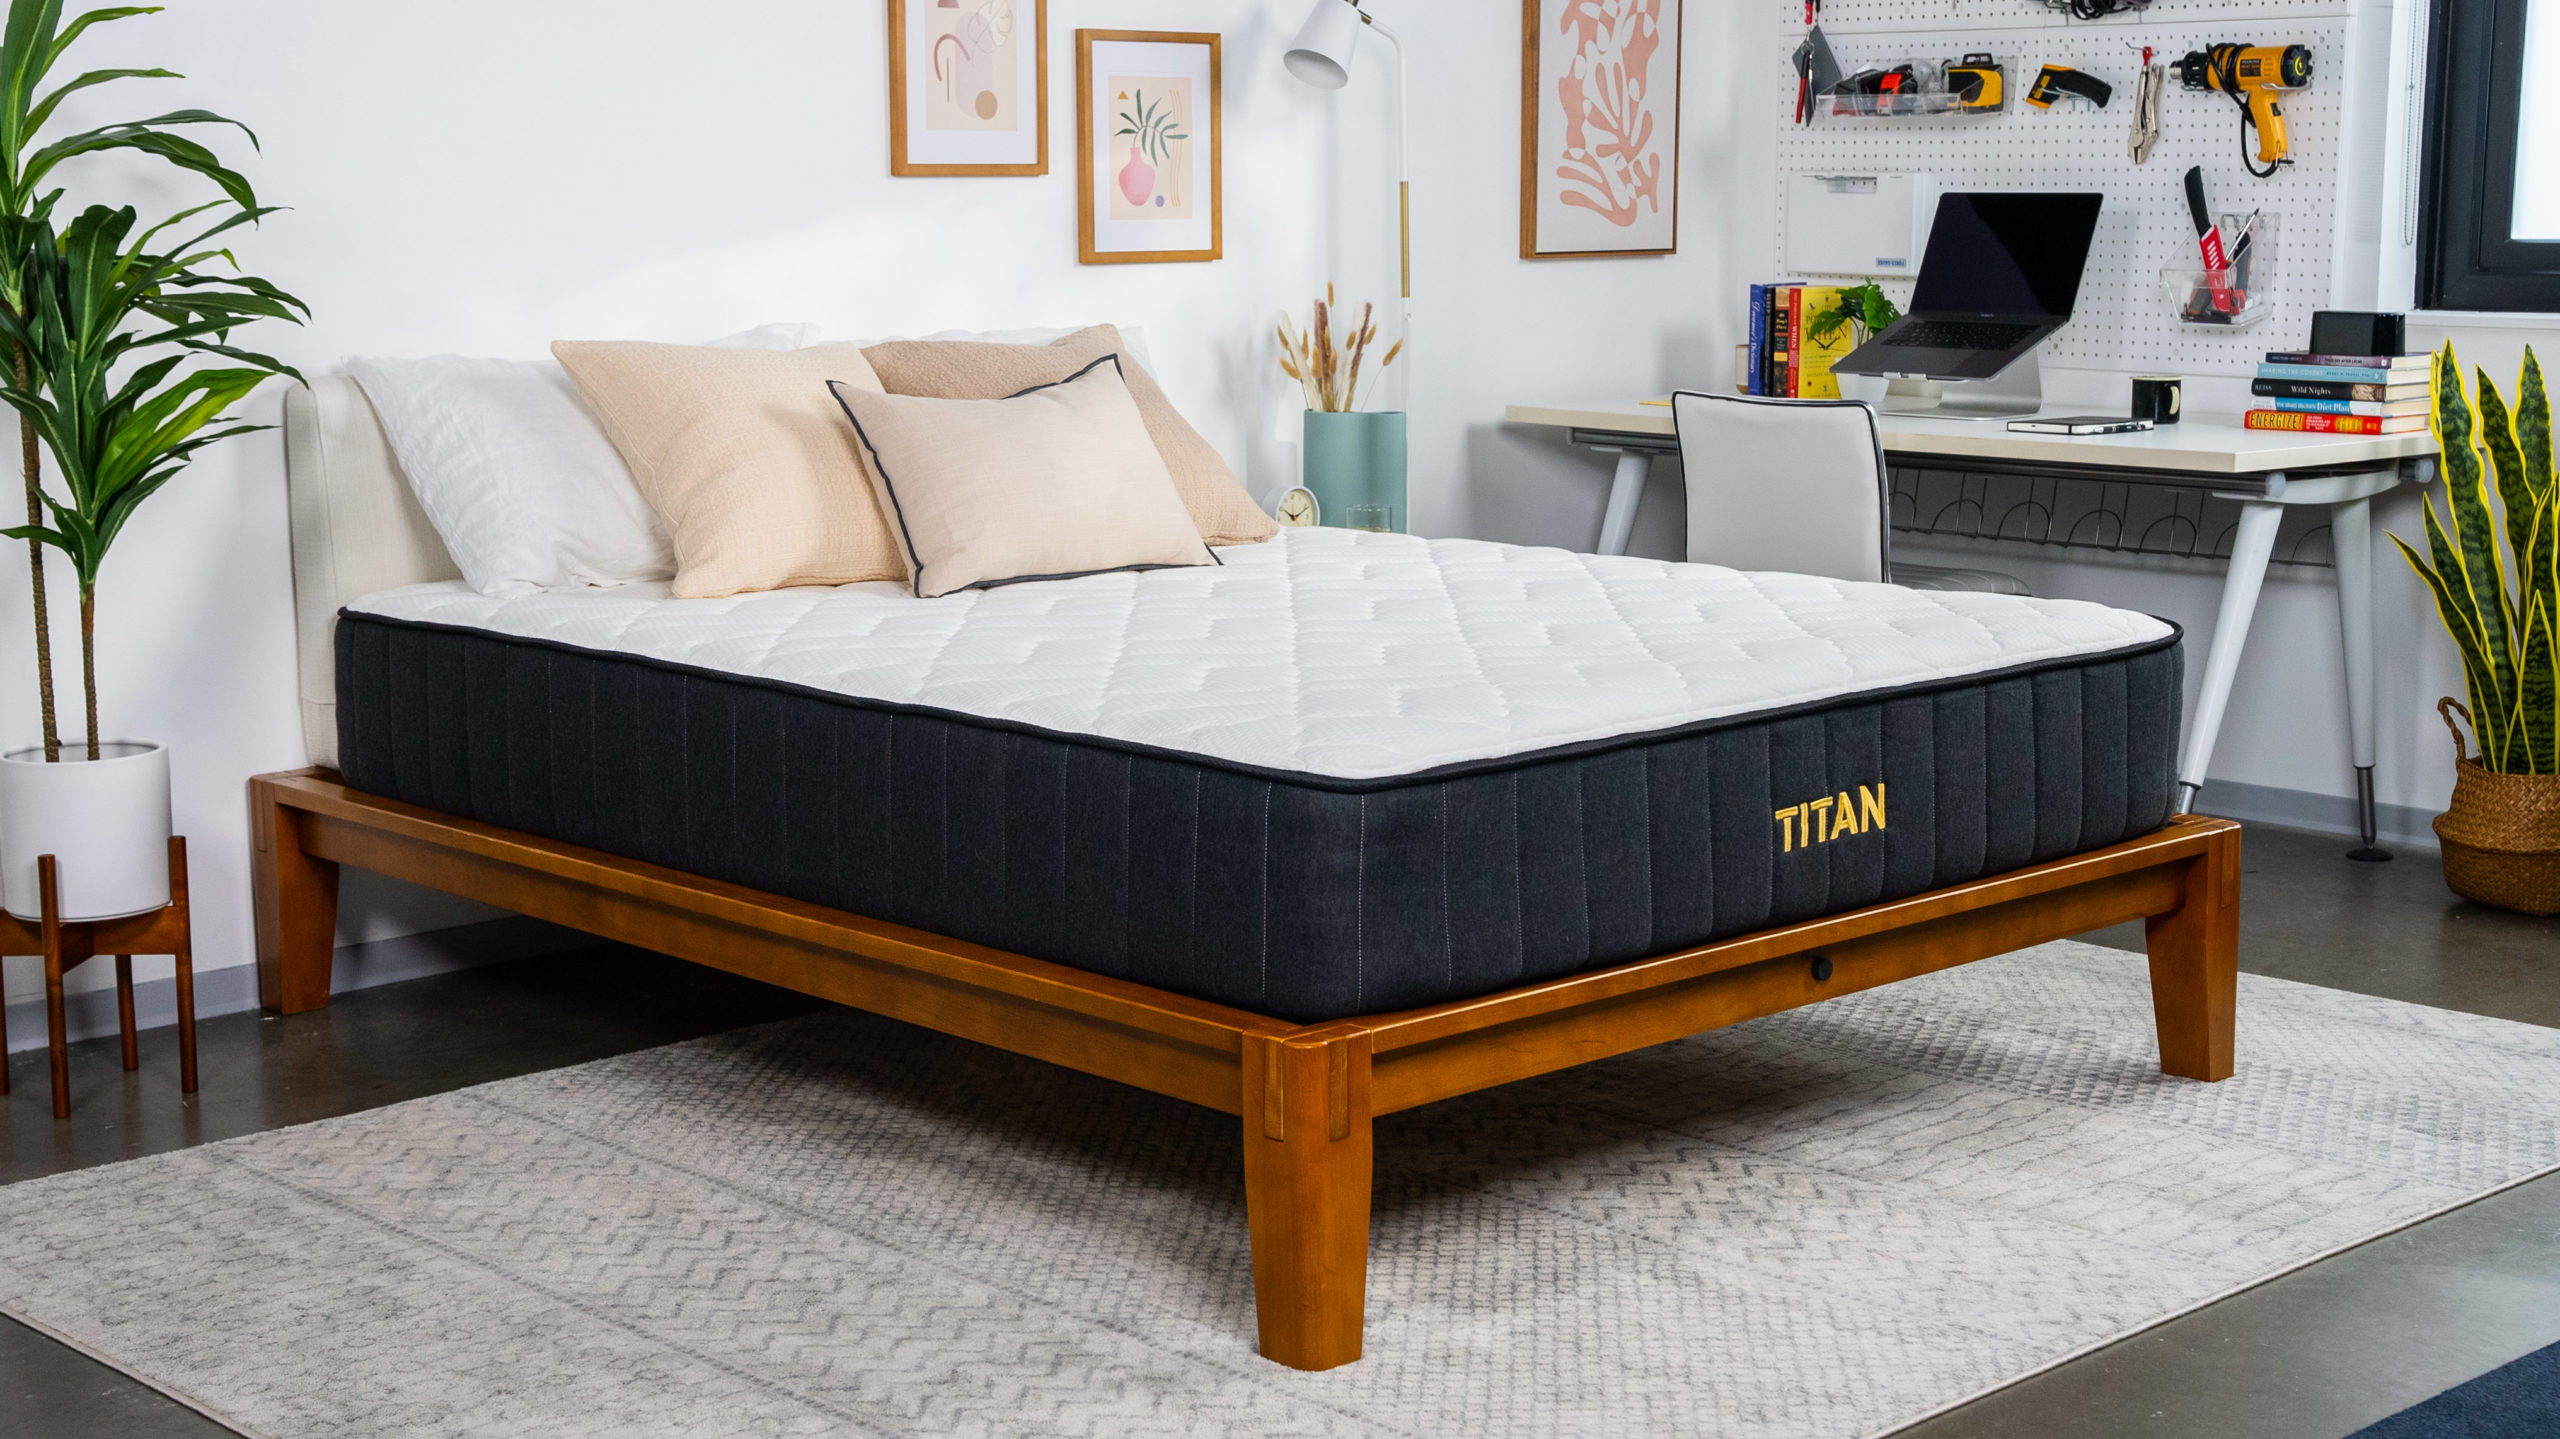 tritan gold deluxe ortho mattress review